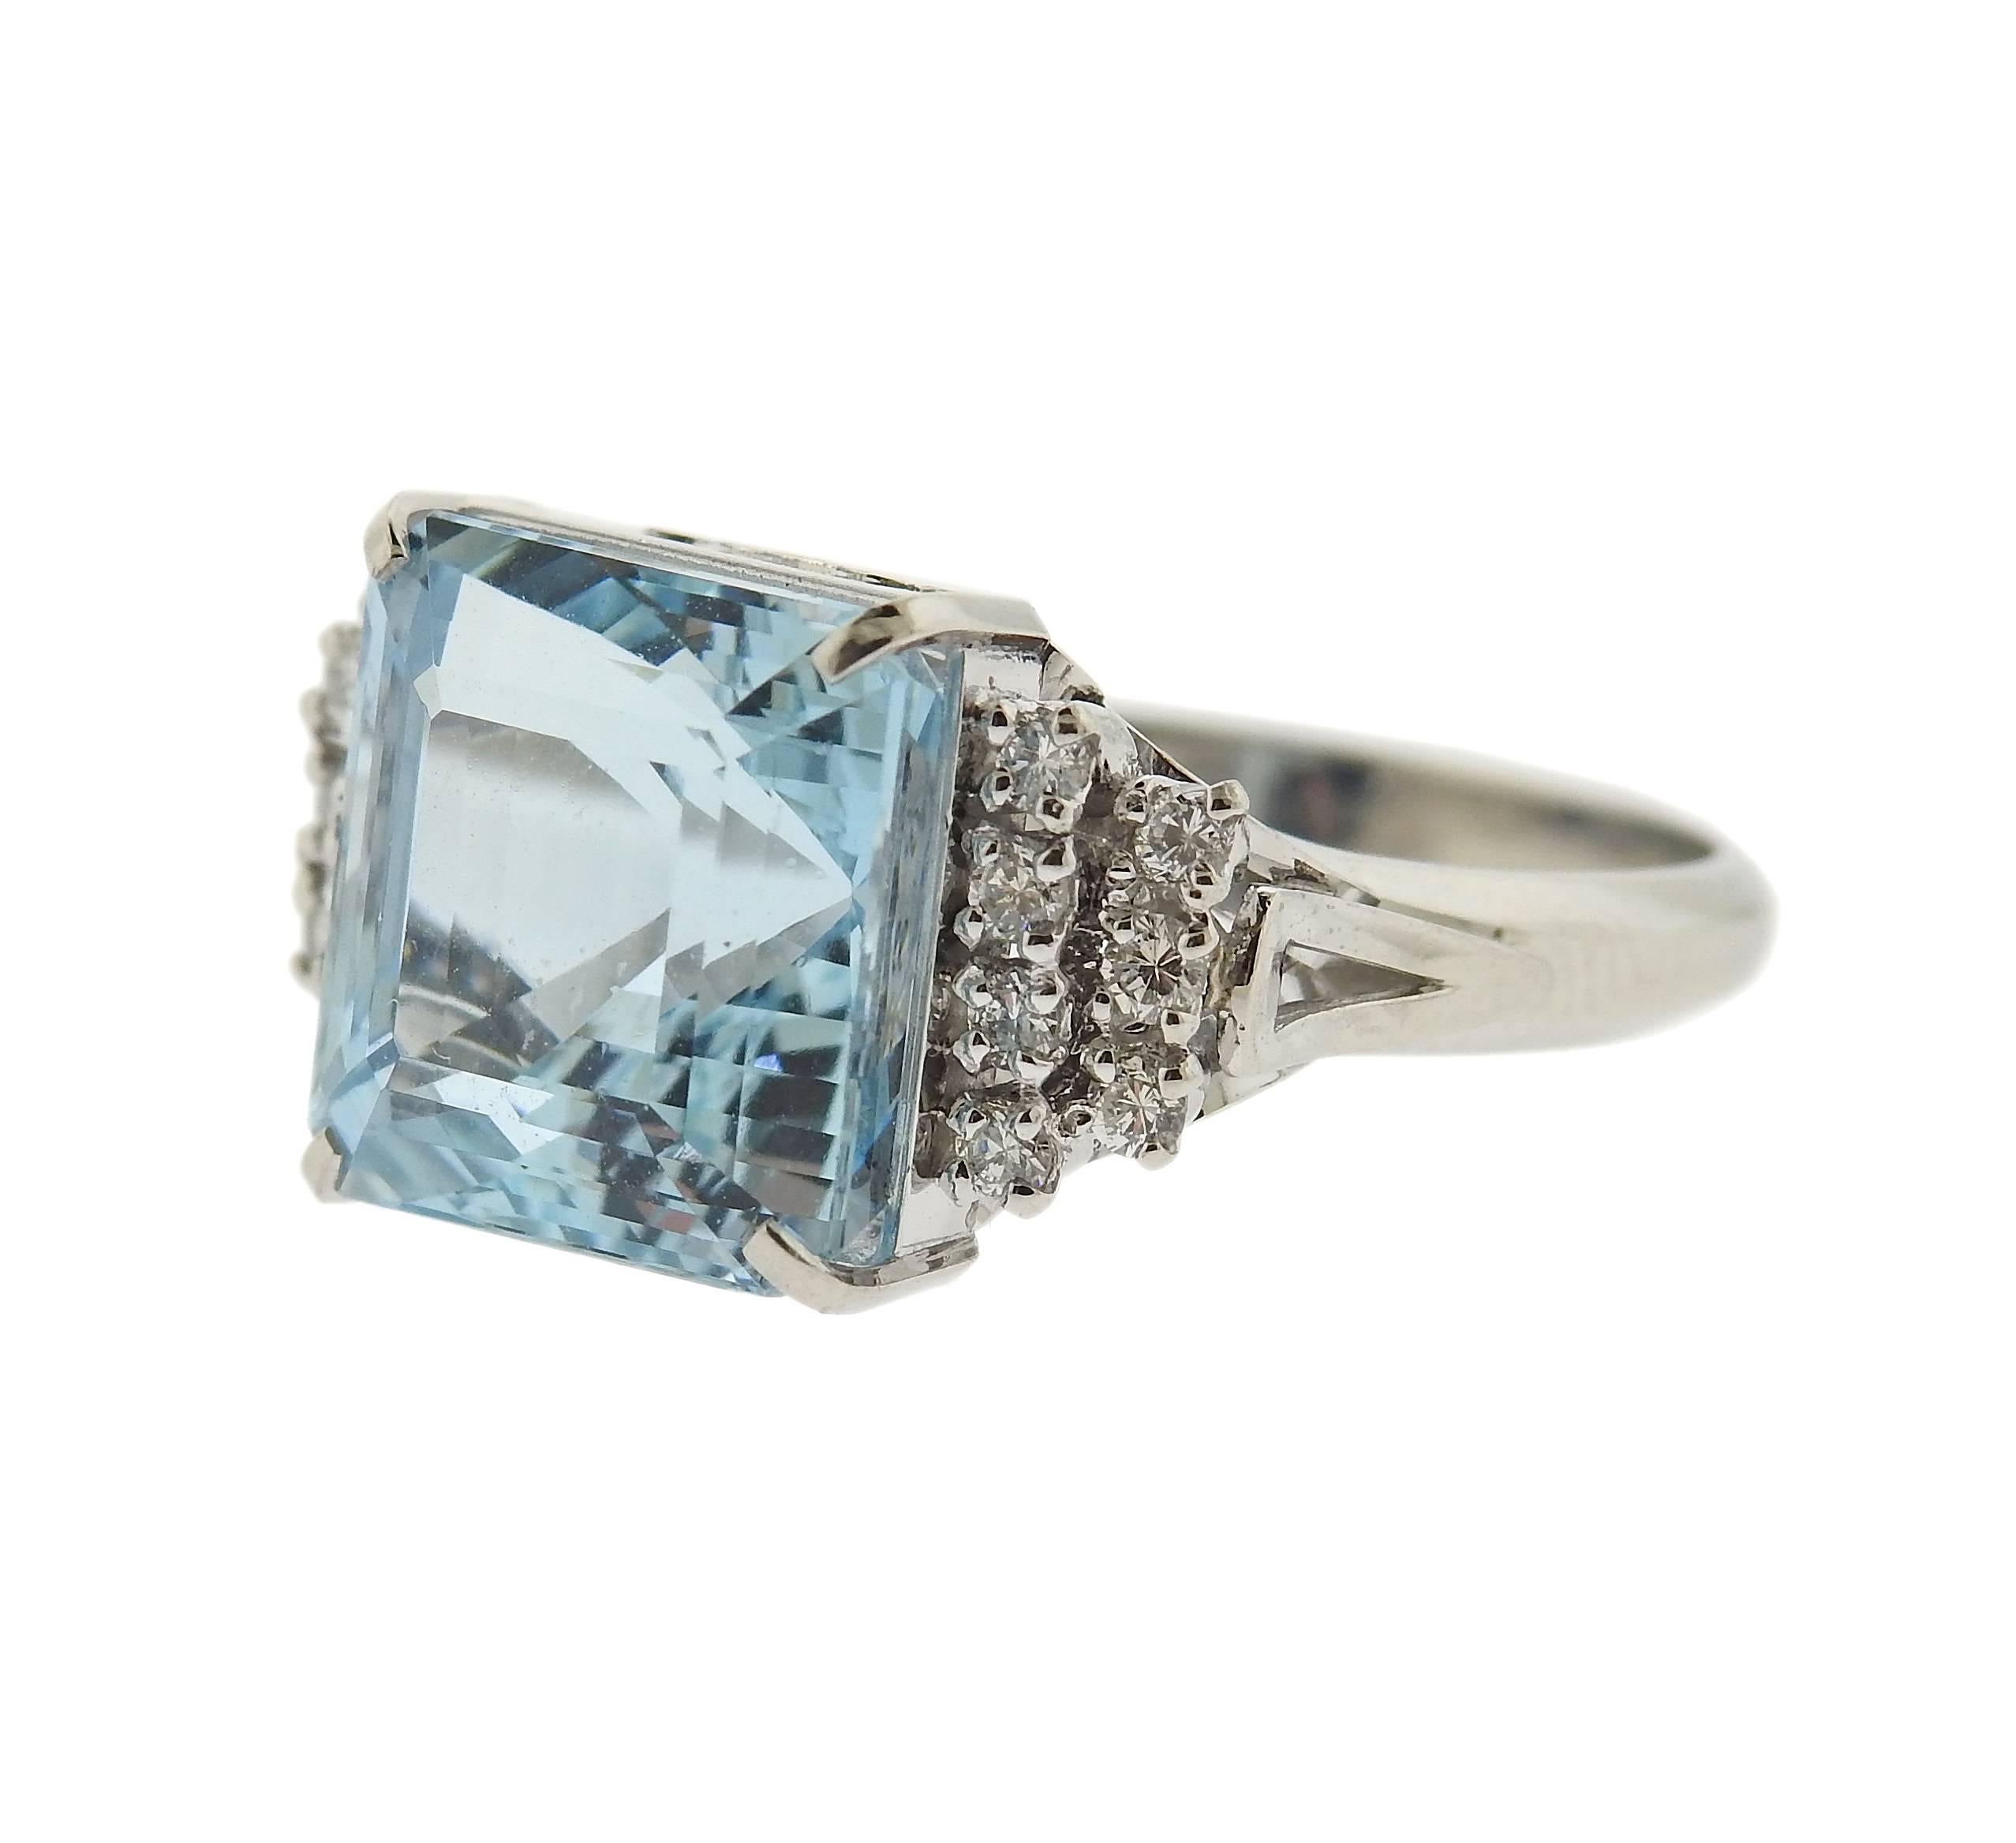 Platinum classic ring, set with  a 7.02ct aquamarine gemstone, surrounded with 0.27ctw in diamonds. Ring is a size 6 1/2, ring top is 11mm x 18mm. Marked: Pt900, 702, D027. Weight of the piece - 7.8 grams. 